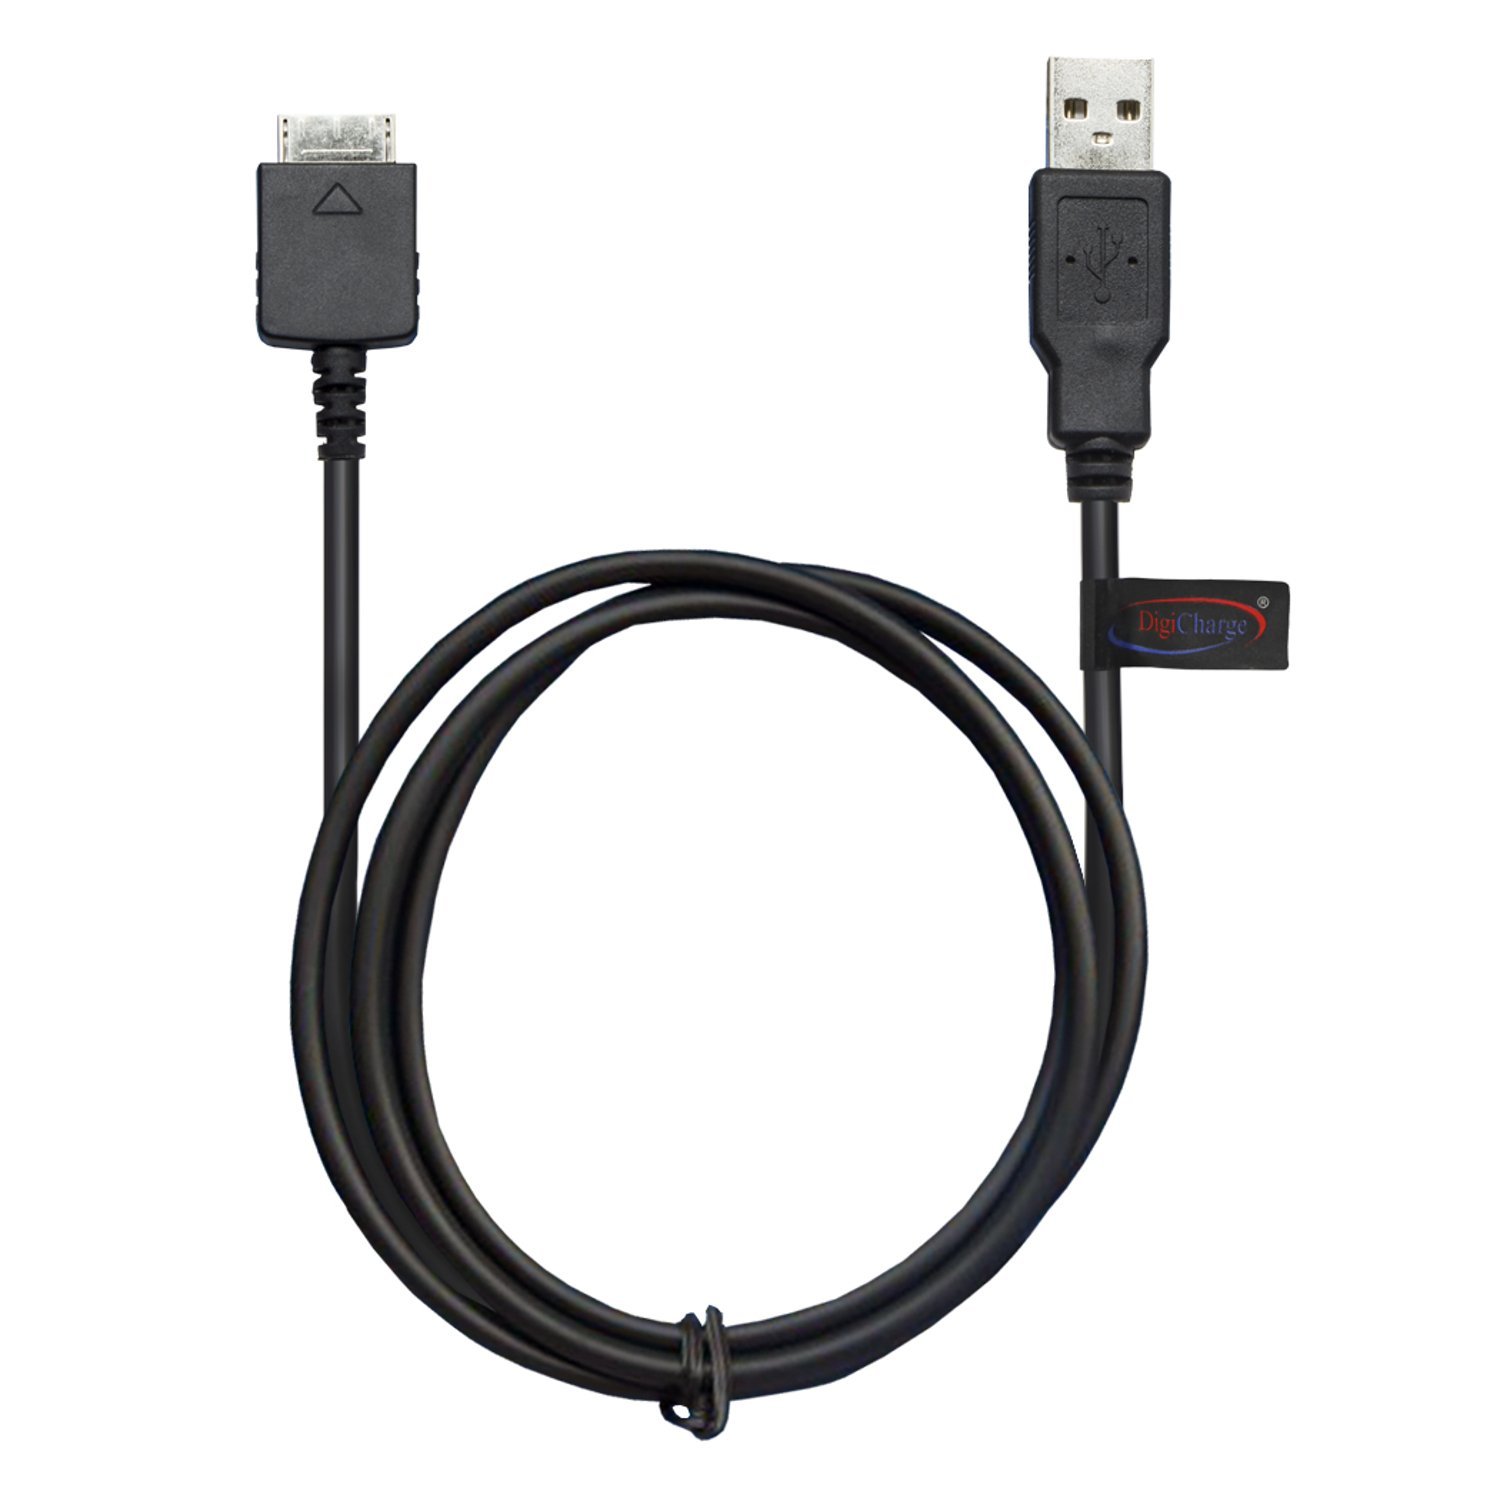 Usb Sync Data Lead Charge Cable Compatible For Sony Walkman Nw-A35 Nw-A40 Nwz-A1 - $12.82